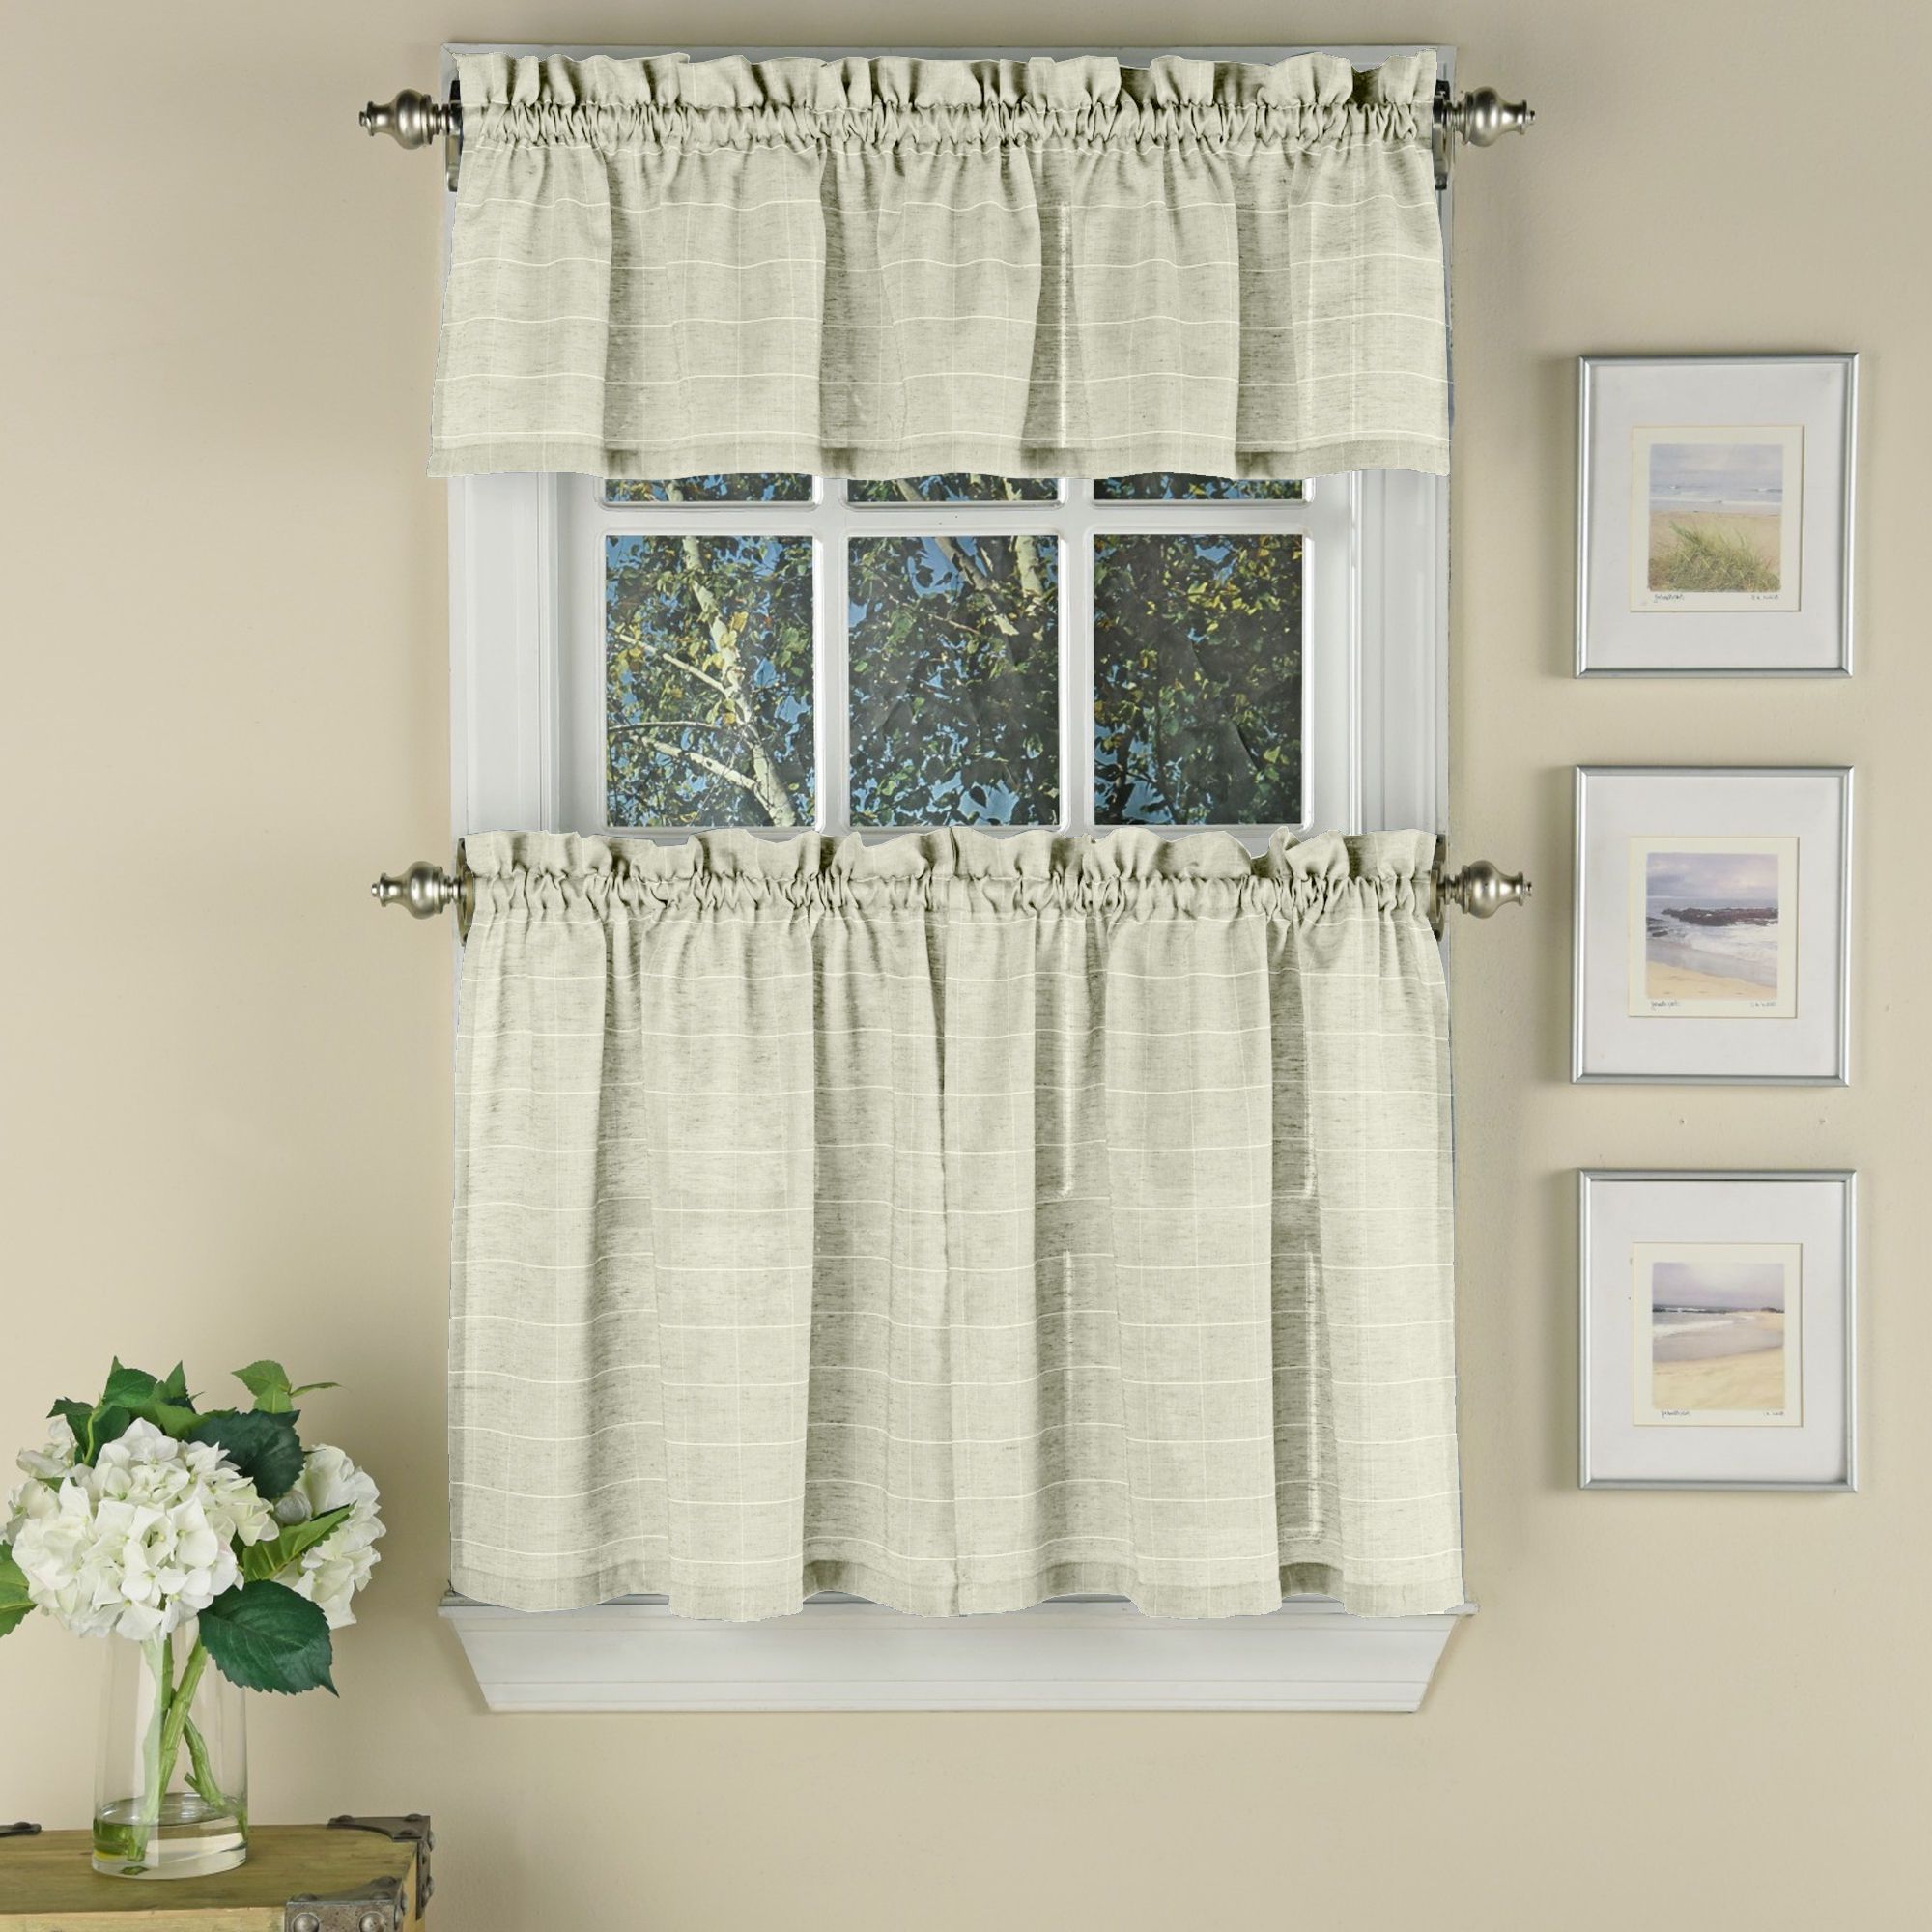 Fashionable Woven Window Pane Pattern Polyester Curtain Pieces Within Dakota Window Curtain Tier Pair And Valance Sets (View 16 of 20)